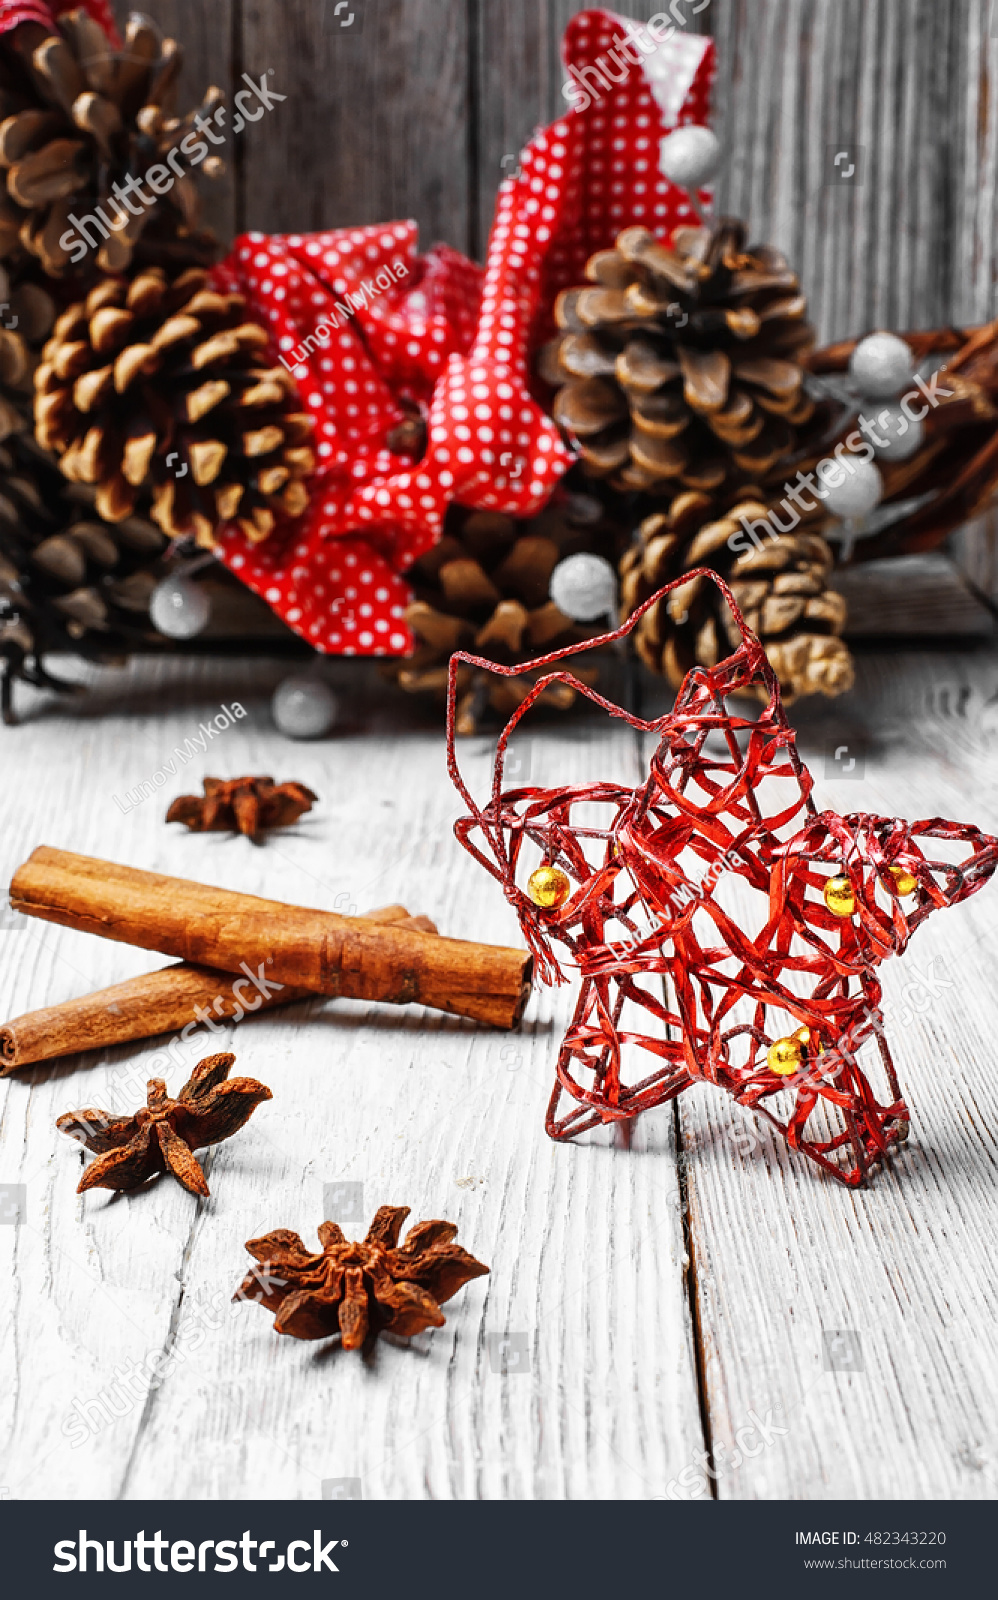 Christmas decoration on the background of the Christmas wreath with pine cones #482343220